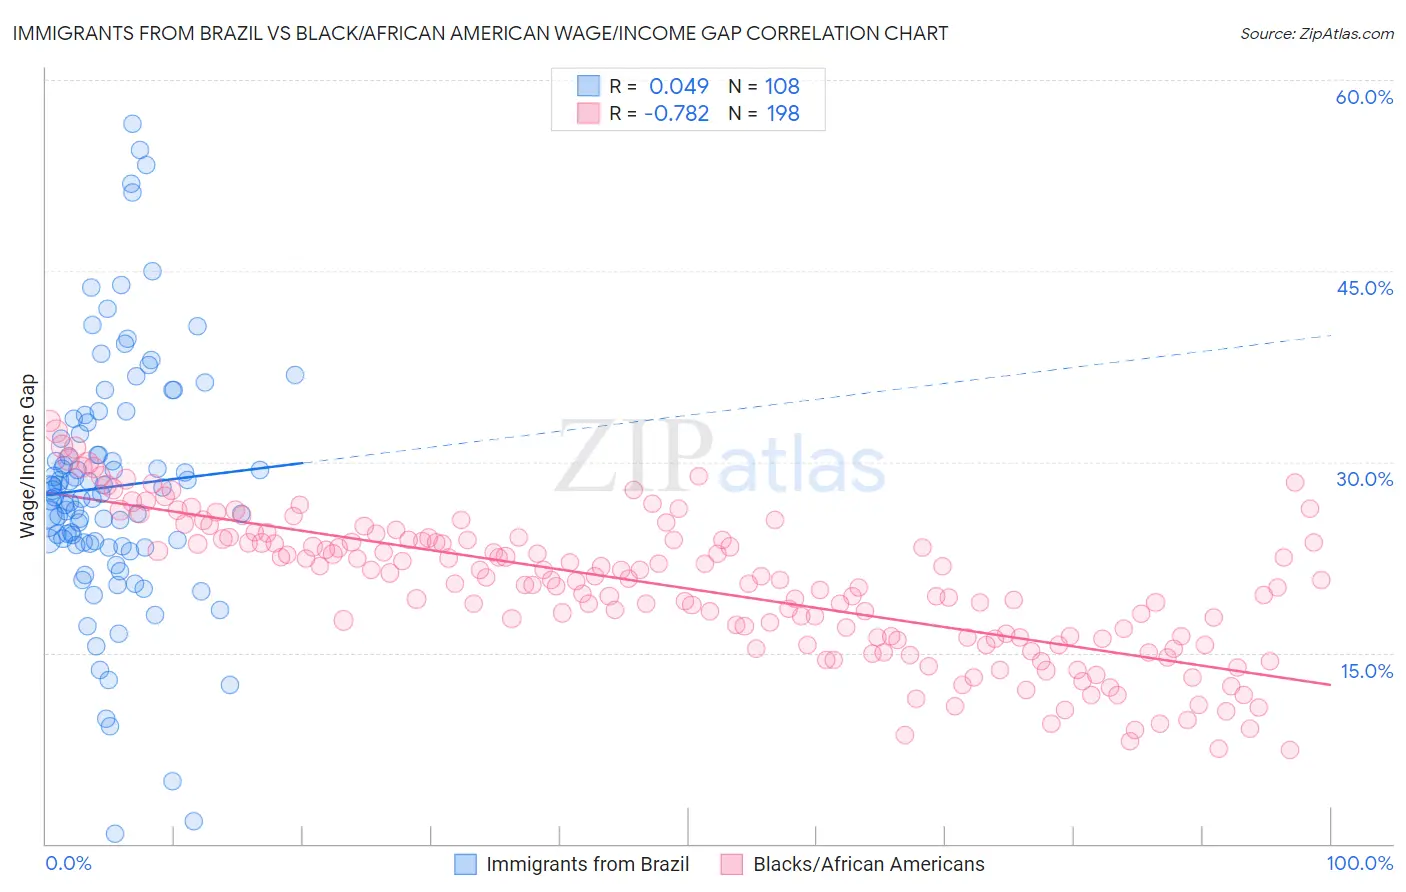 Immigrants from Brazil vs Black/African American Wage/Income Gap